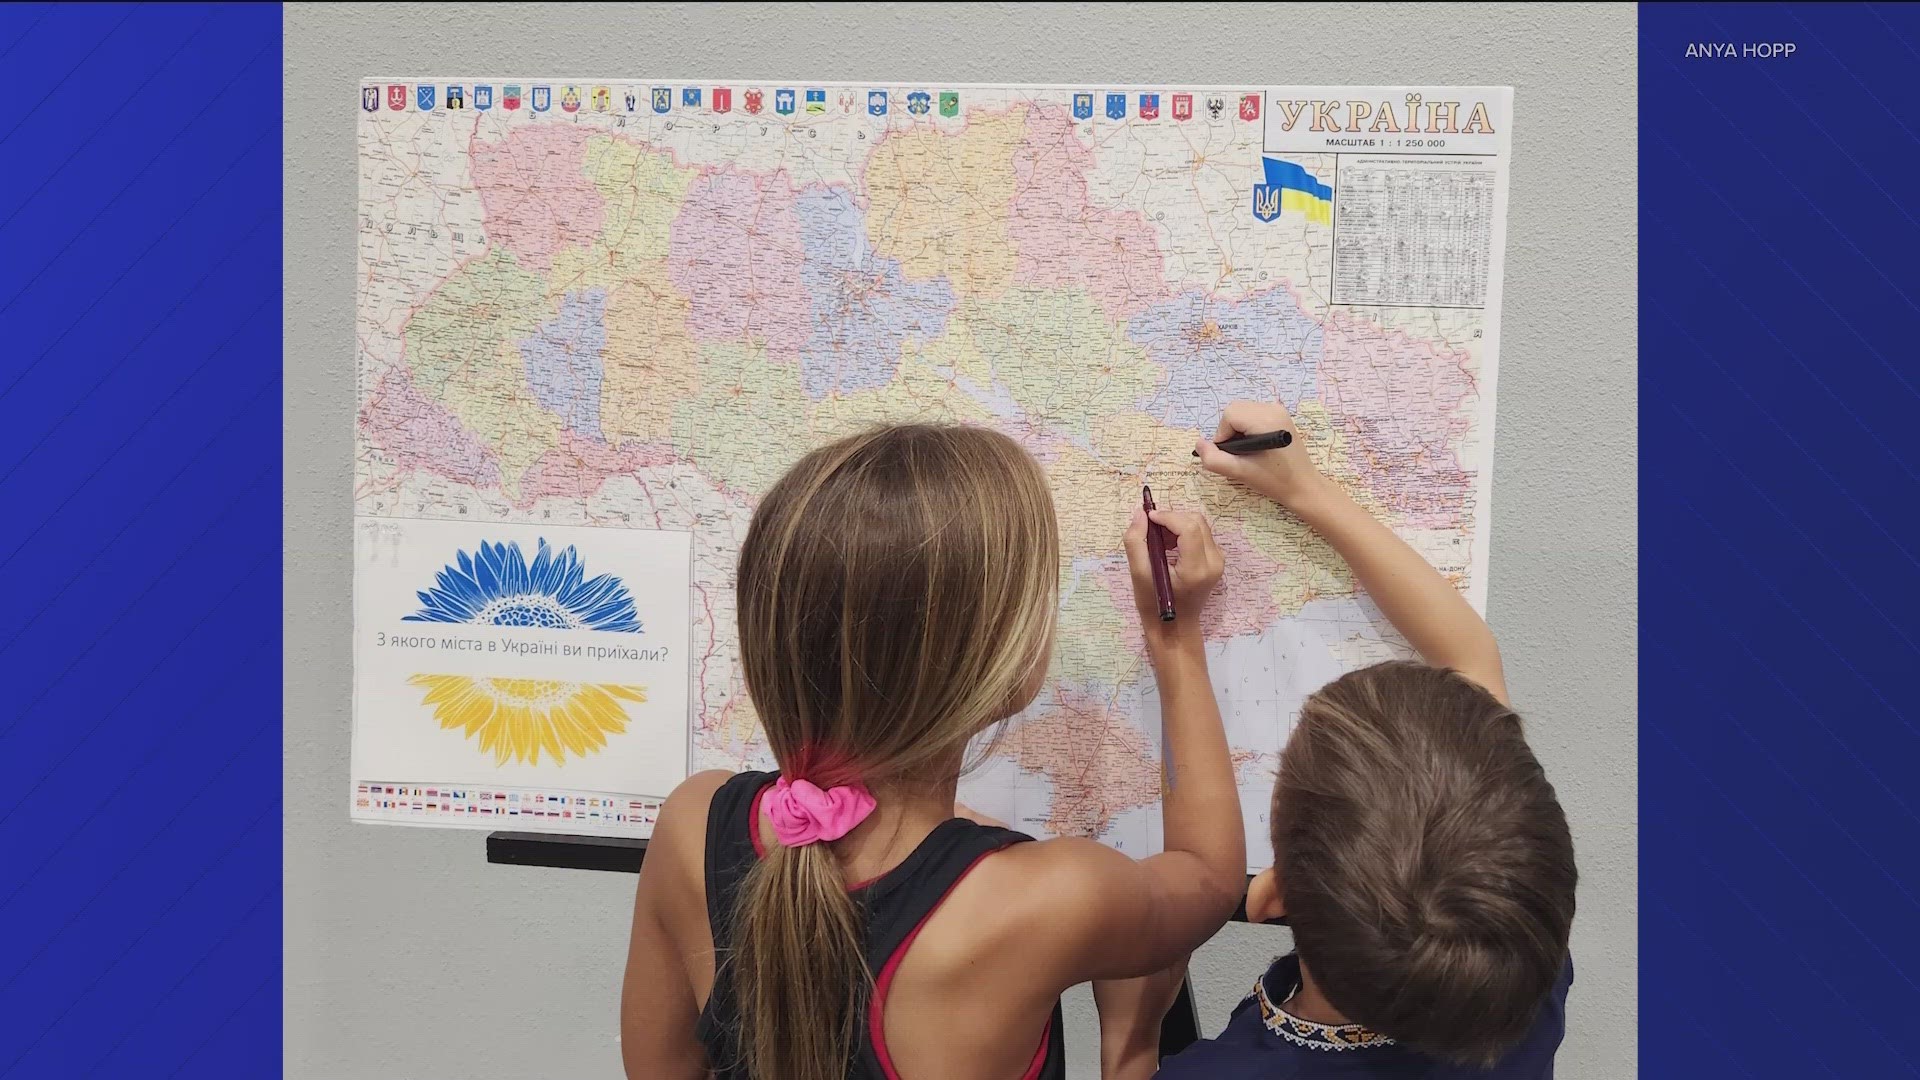 50 Ukrainian refugees were welcomed to Austin with welcome boxes Saturday afternoon.